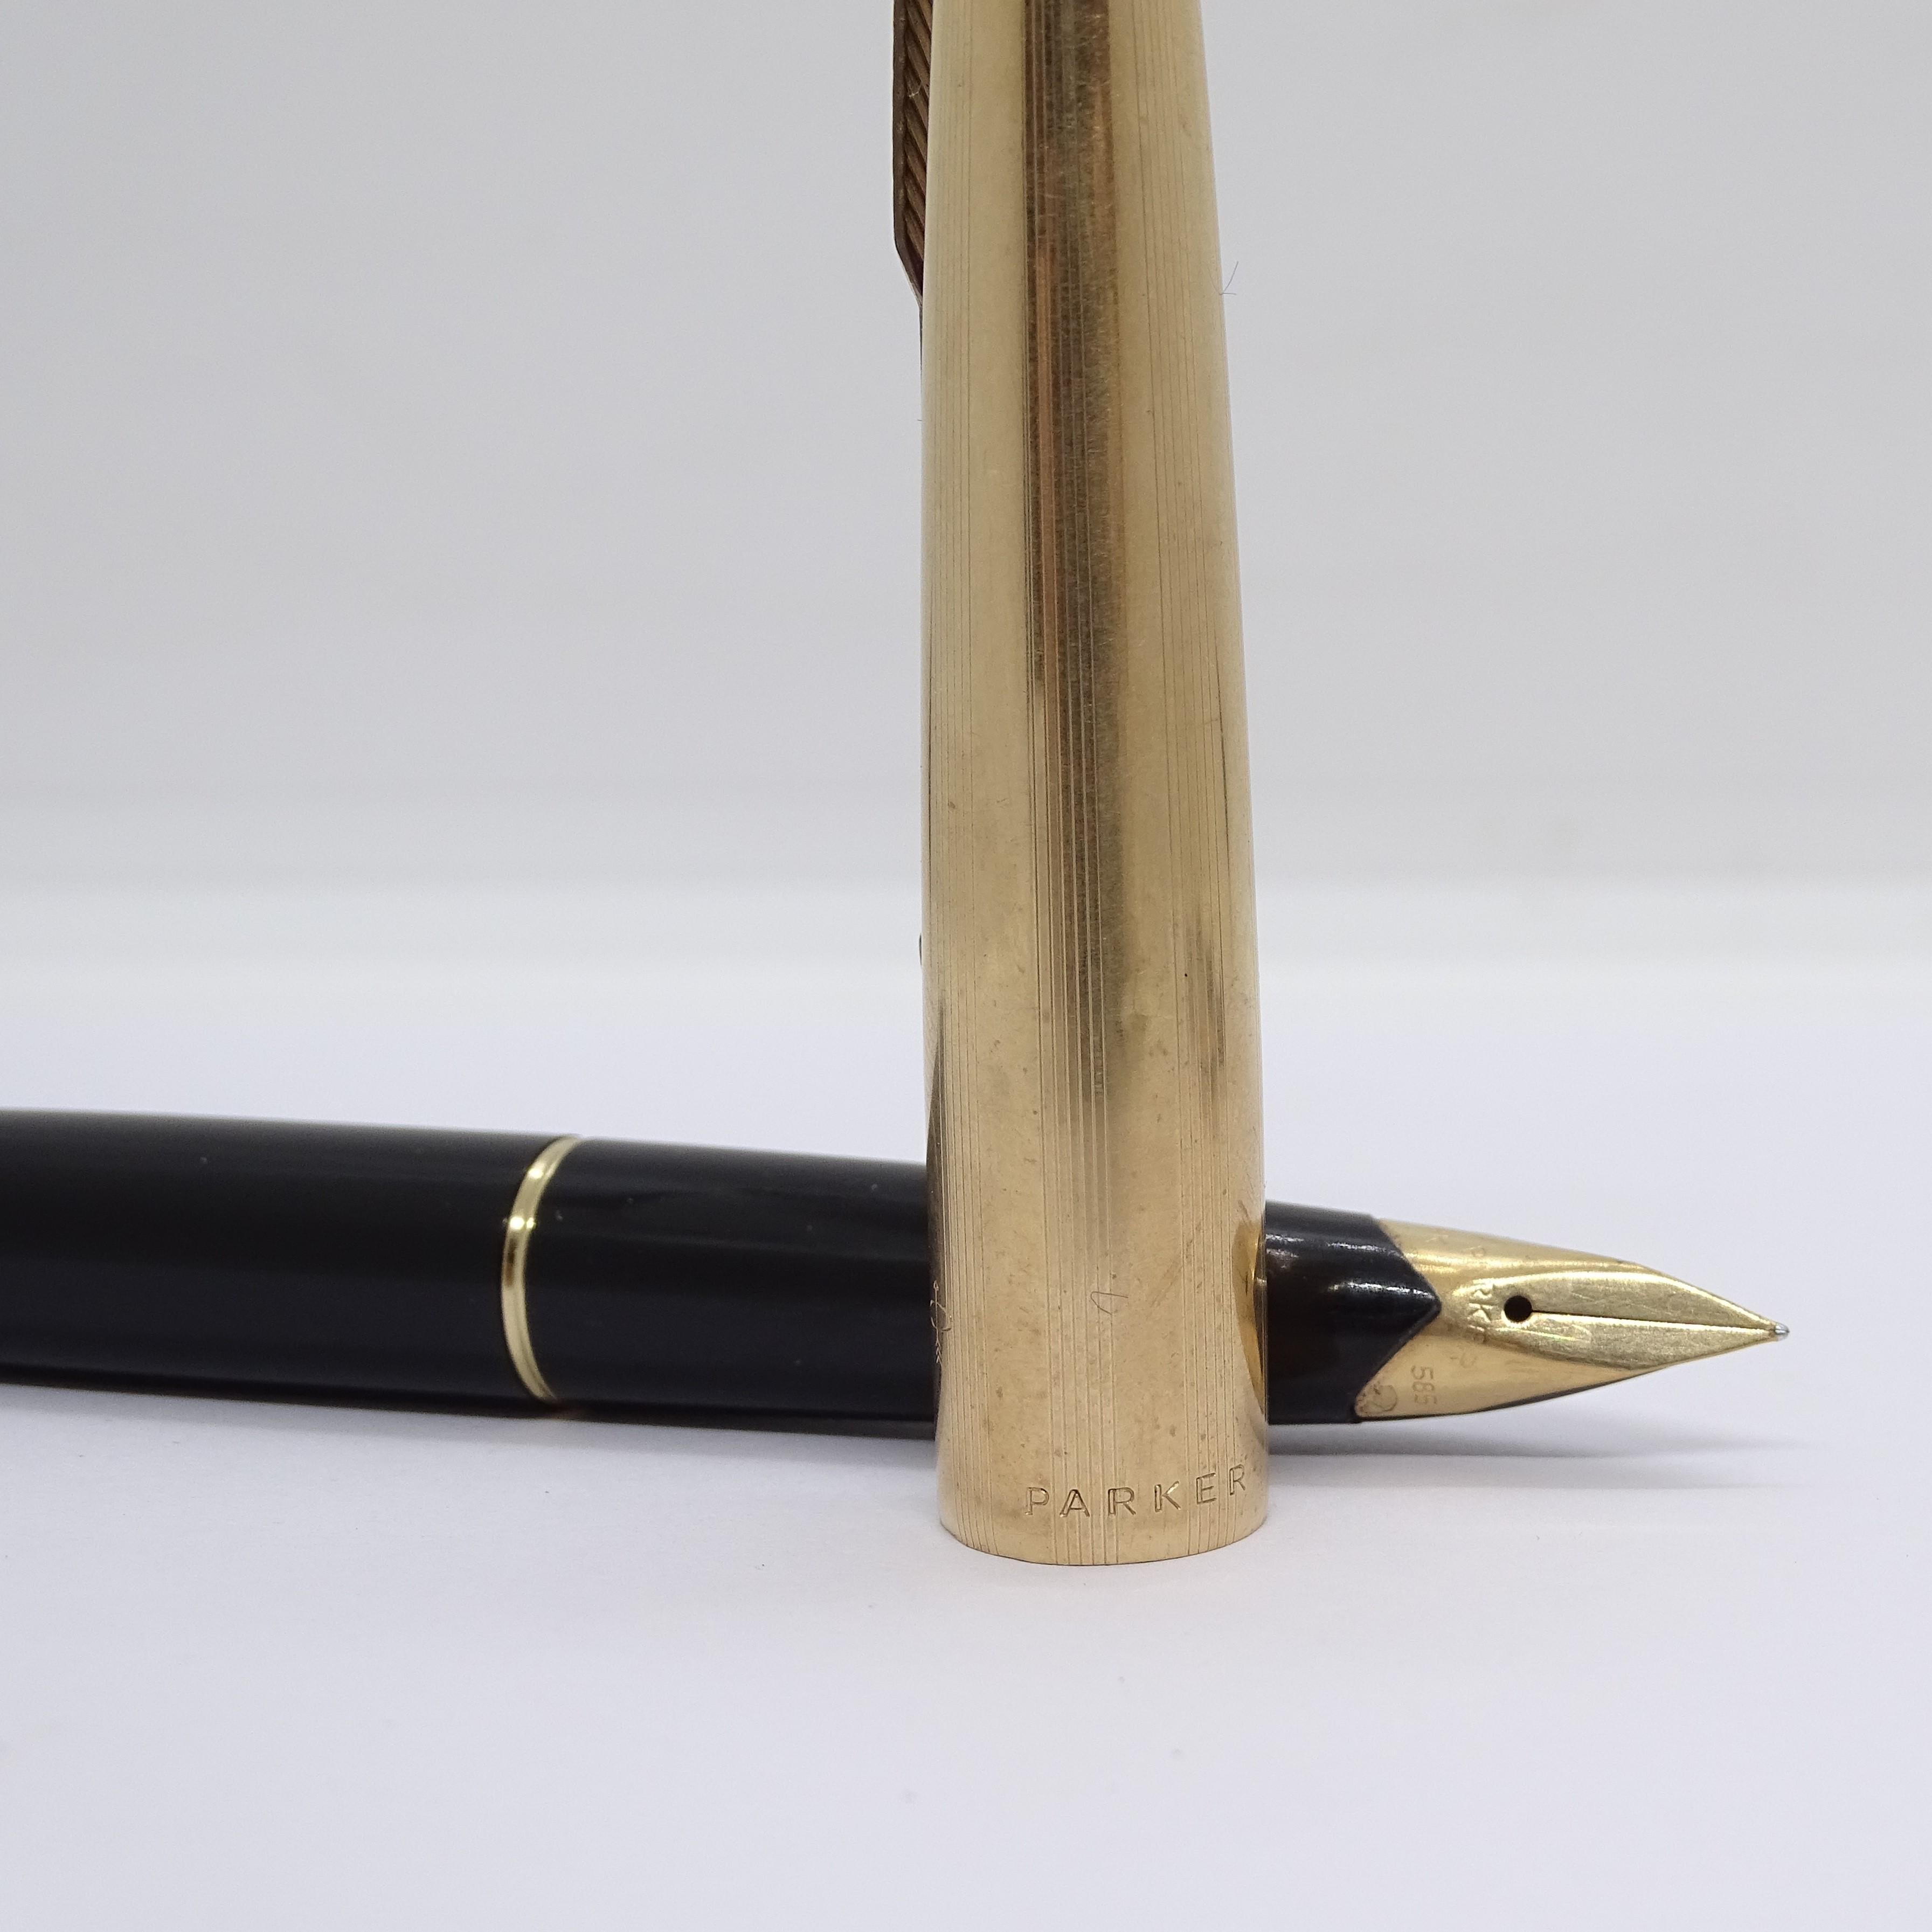 Parker 65 Custom Black writing set with case, 14k gold plated, 70's 5